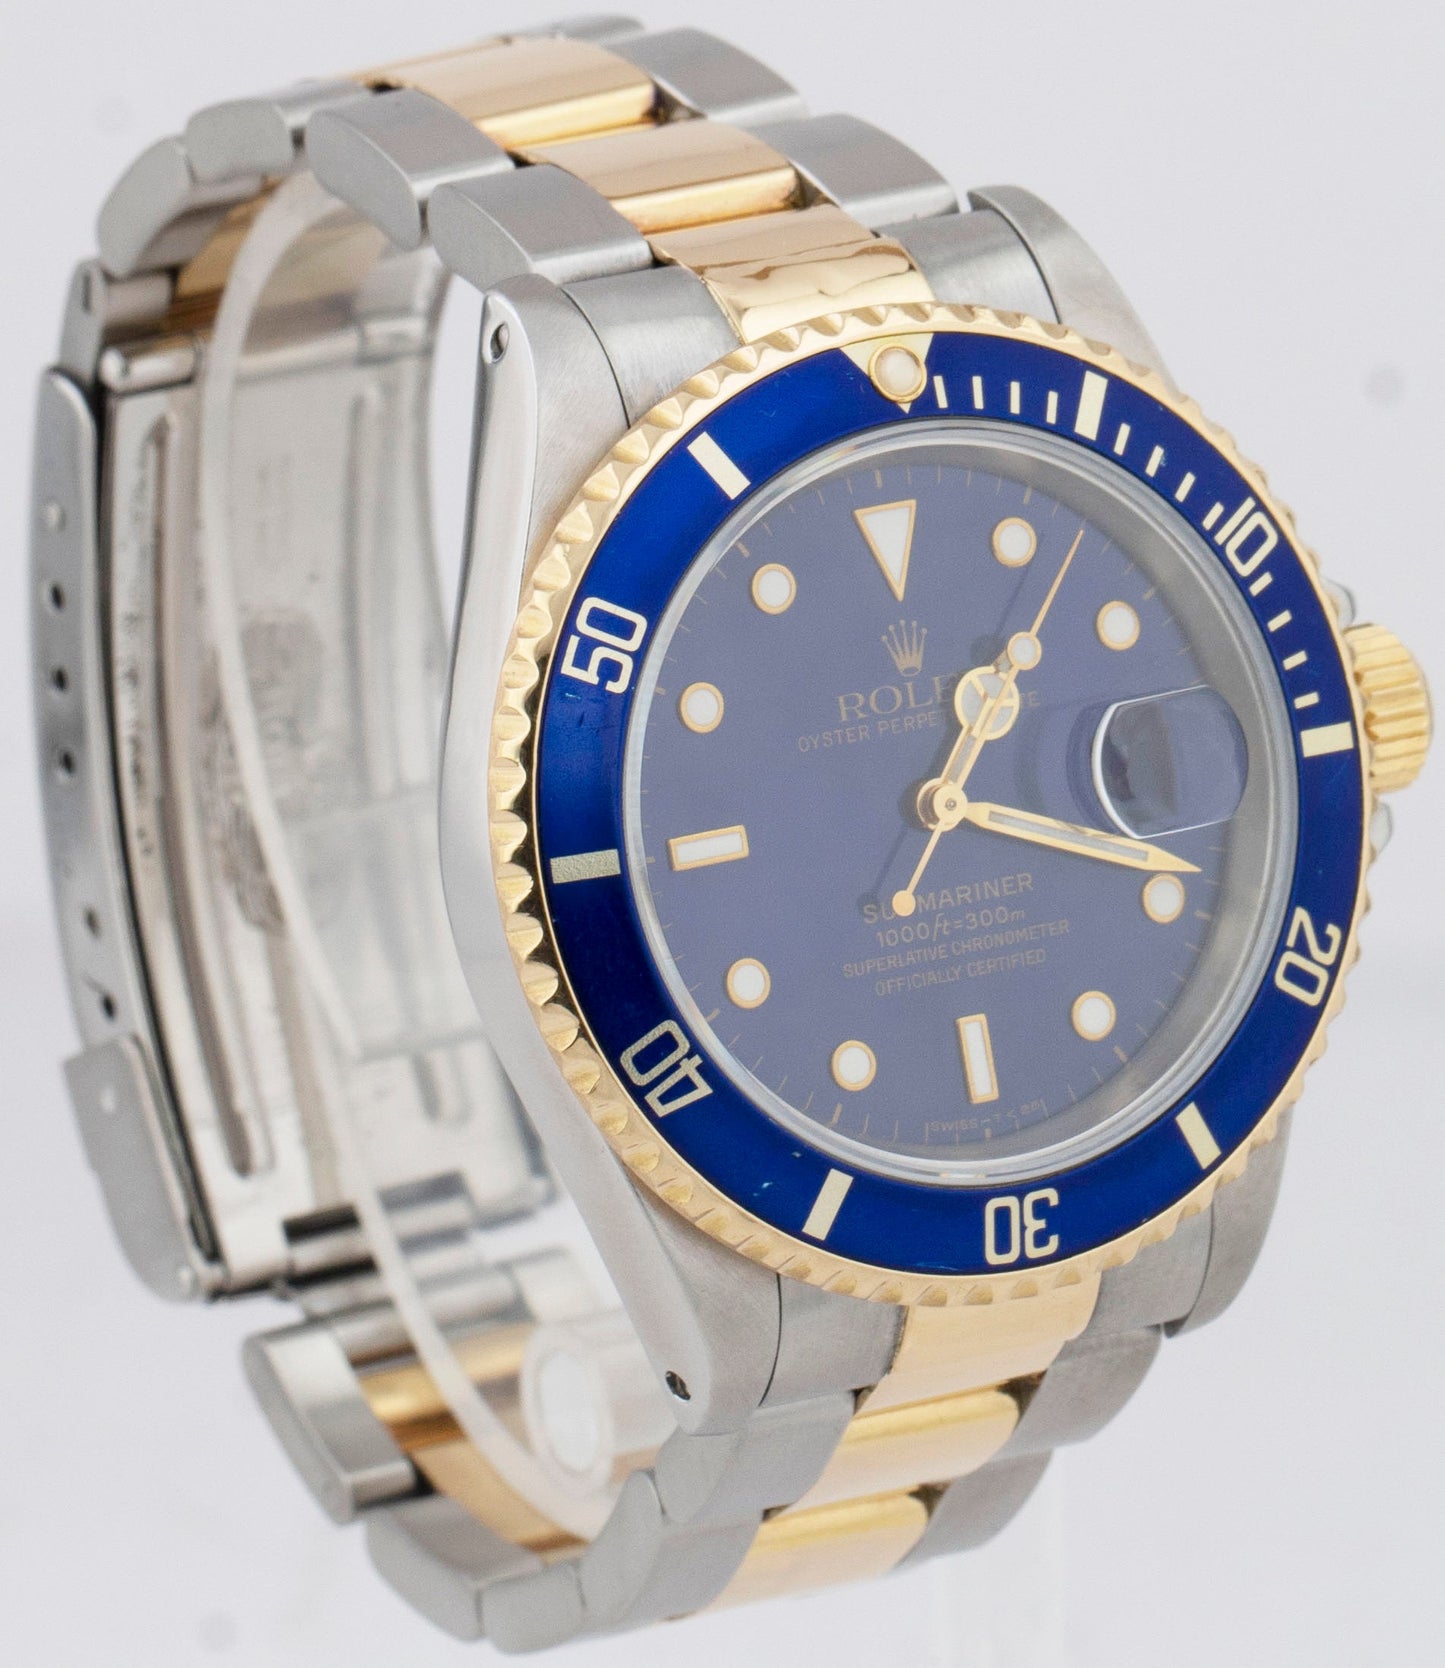 1995 PAPERS Rolex Submariner Date 40mm BLUE DIAL Two-Tone 16613 LB Watch B+P